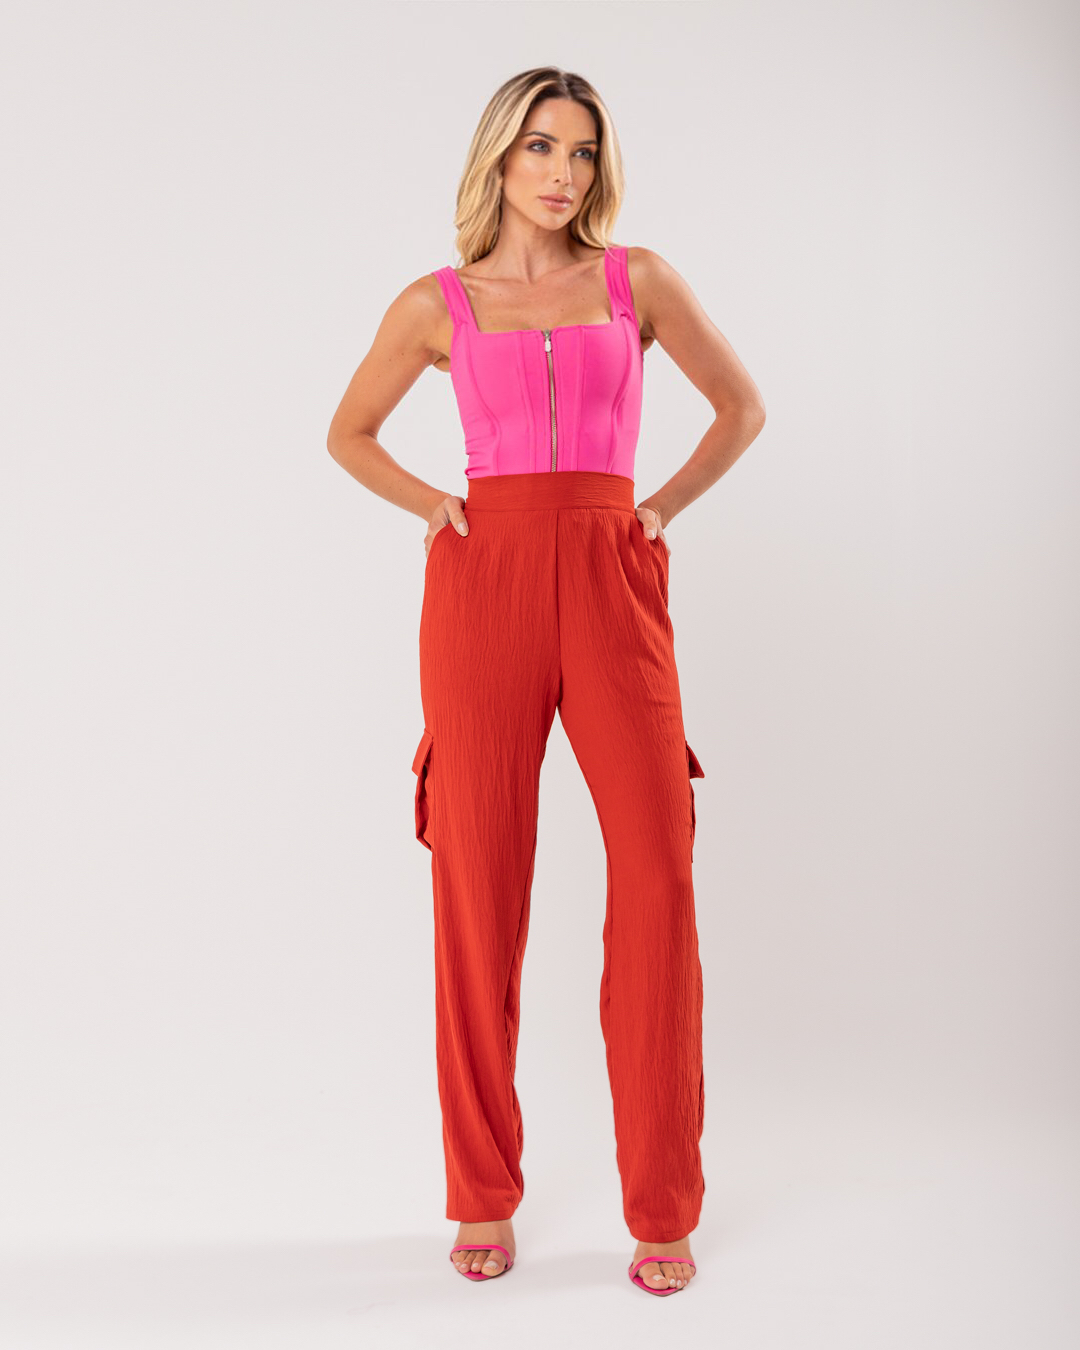 Miss Misses - Cropped Miss Misses With Zipper With Pink Fin - 18795060